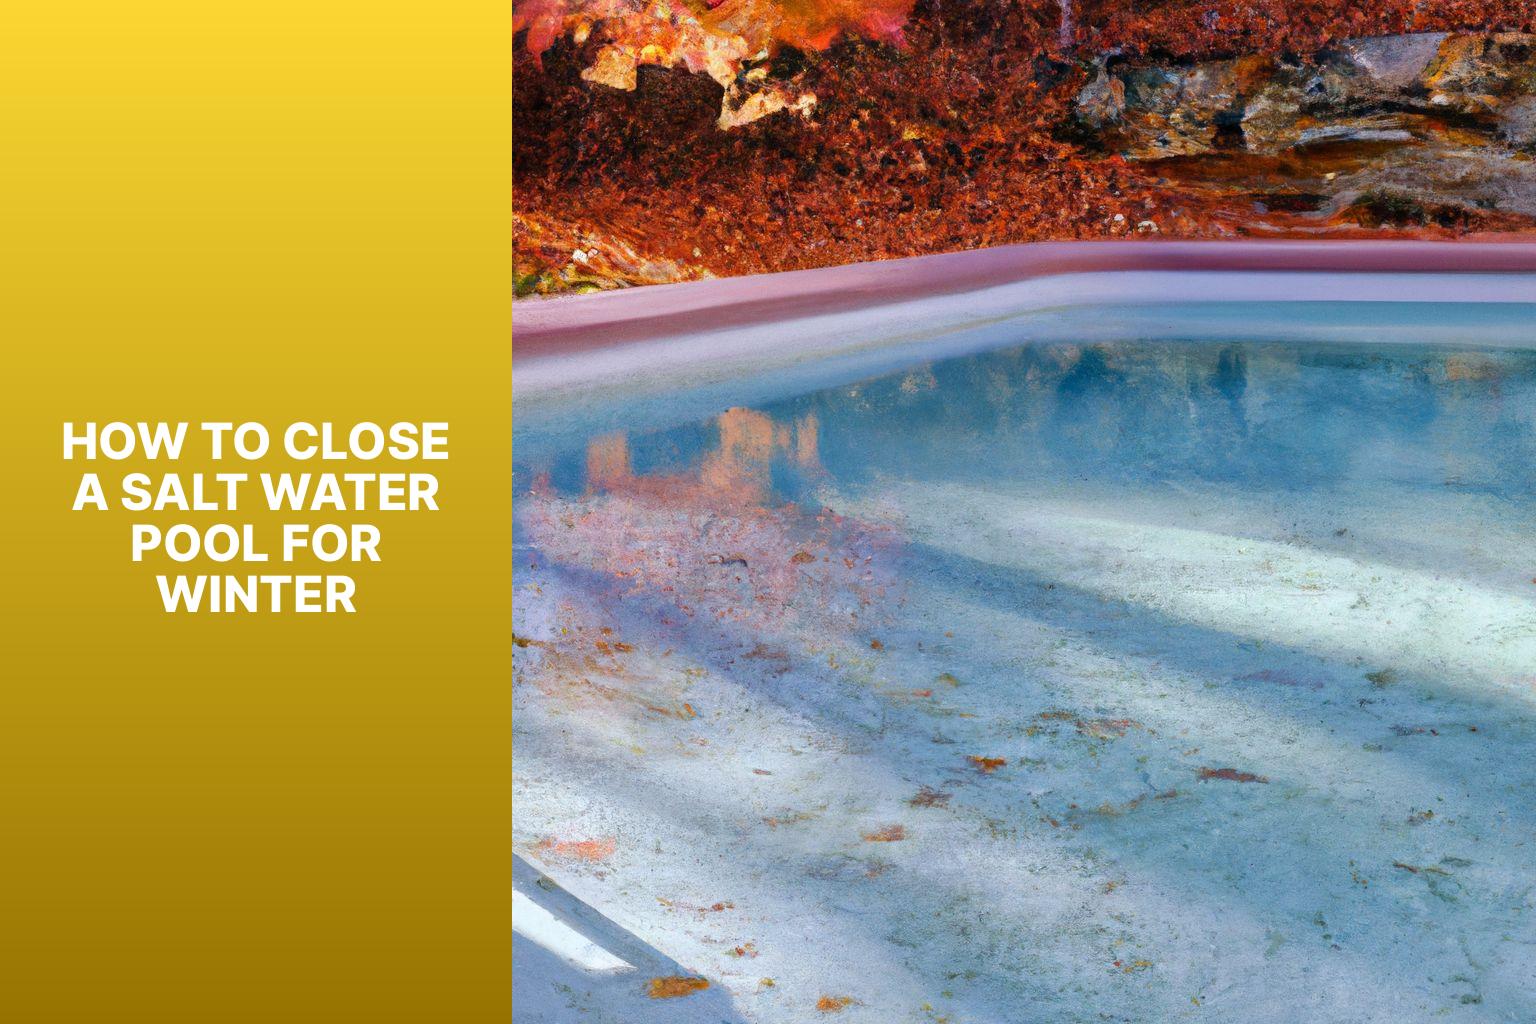 how to close a salt water pool for winter4jic How to Close a Salt Water Pool for Winter?